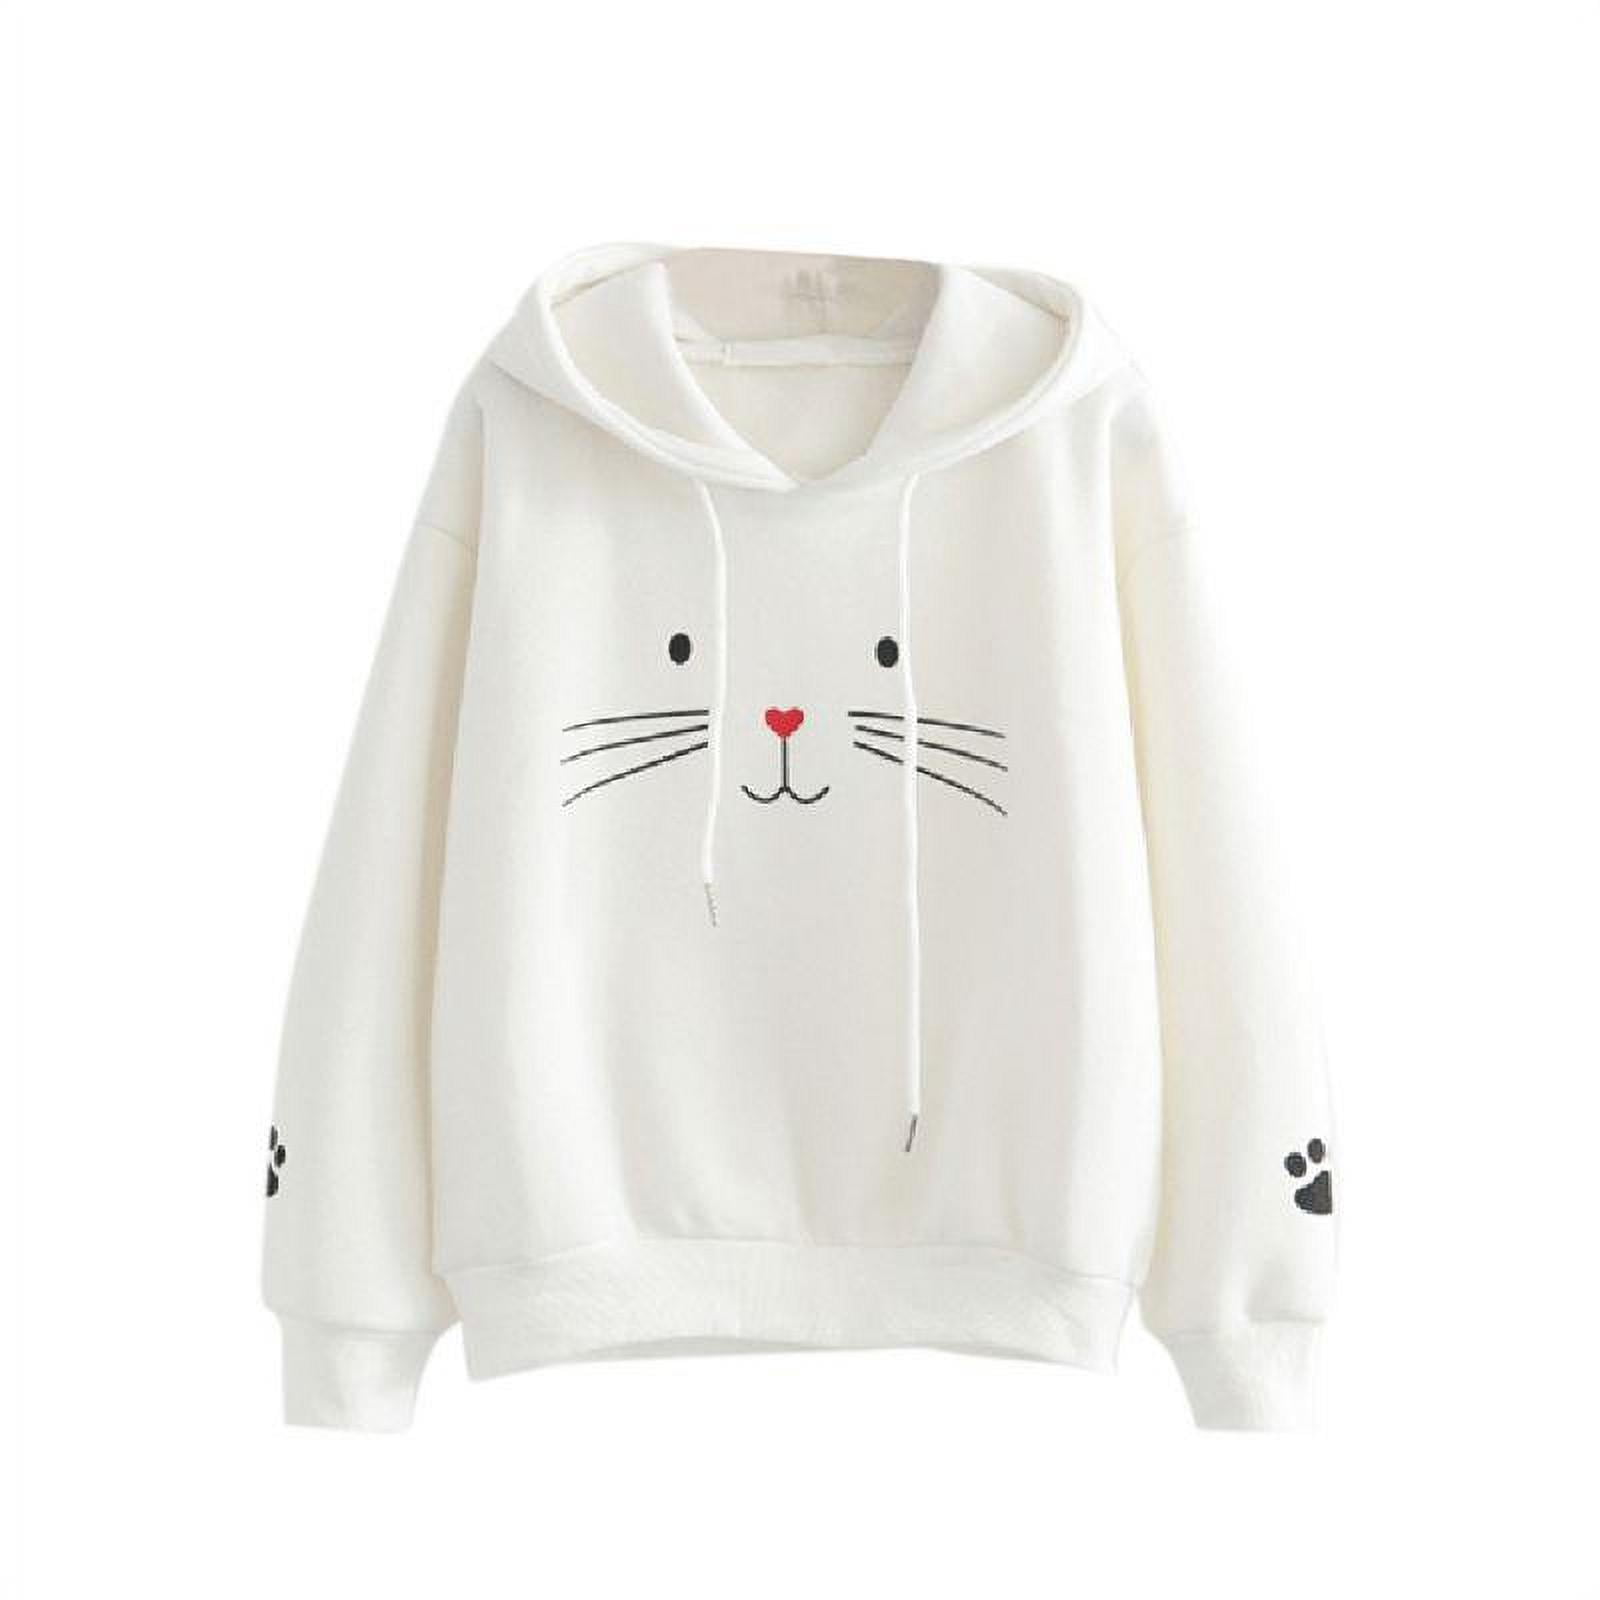 Juliarode Womens&Lady Fashion Cat Print Hoodie with Ears Hooded Sweatshirt Hooded Pullover Tops Clothes 